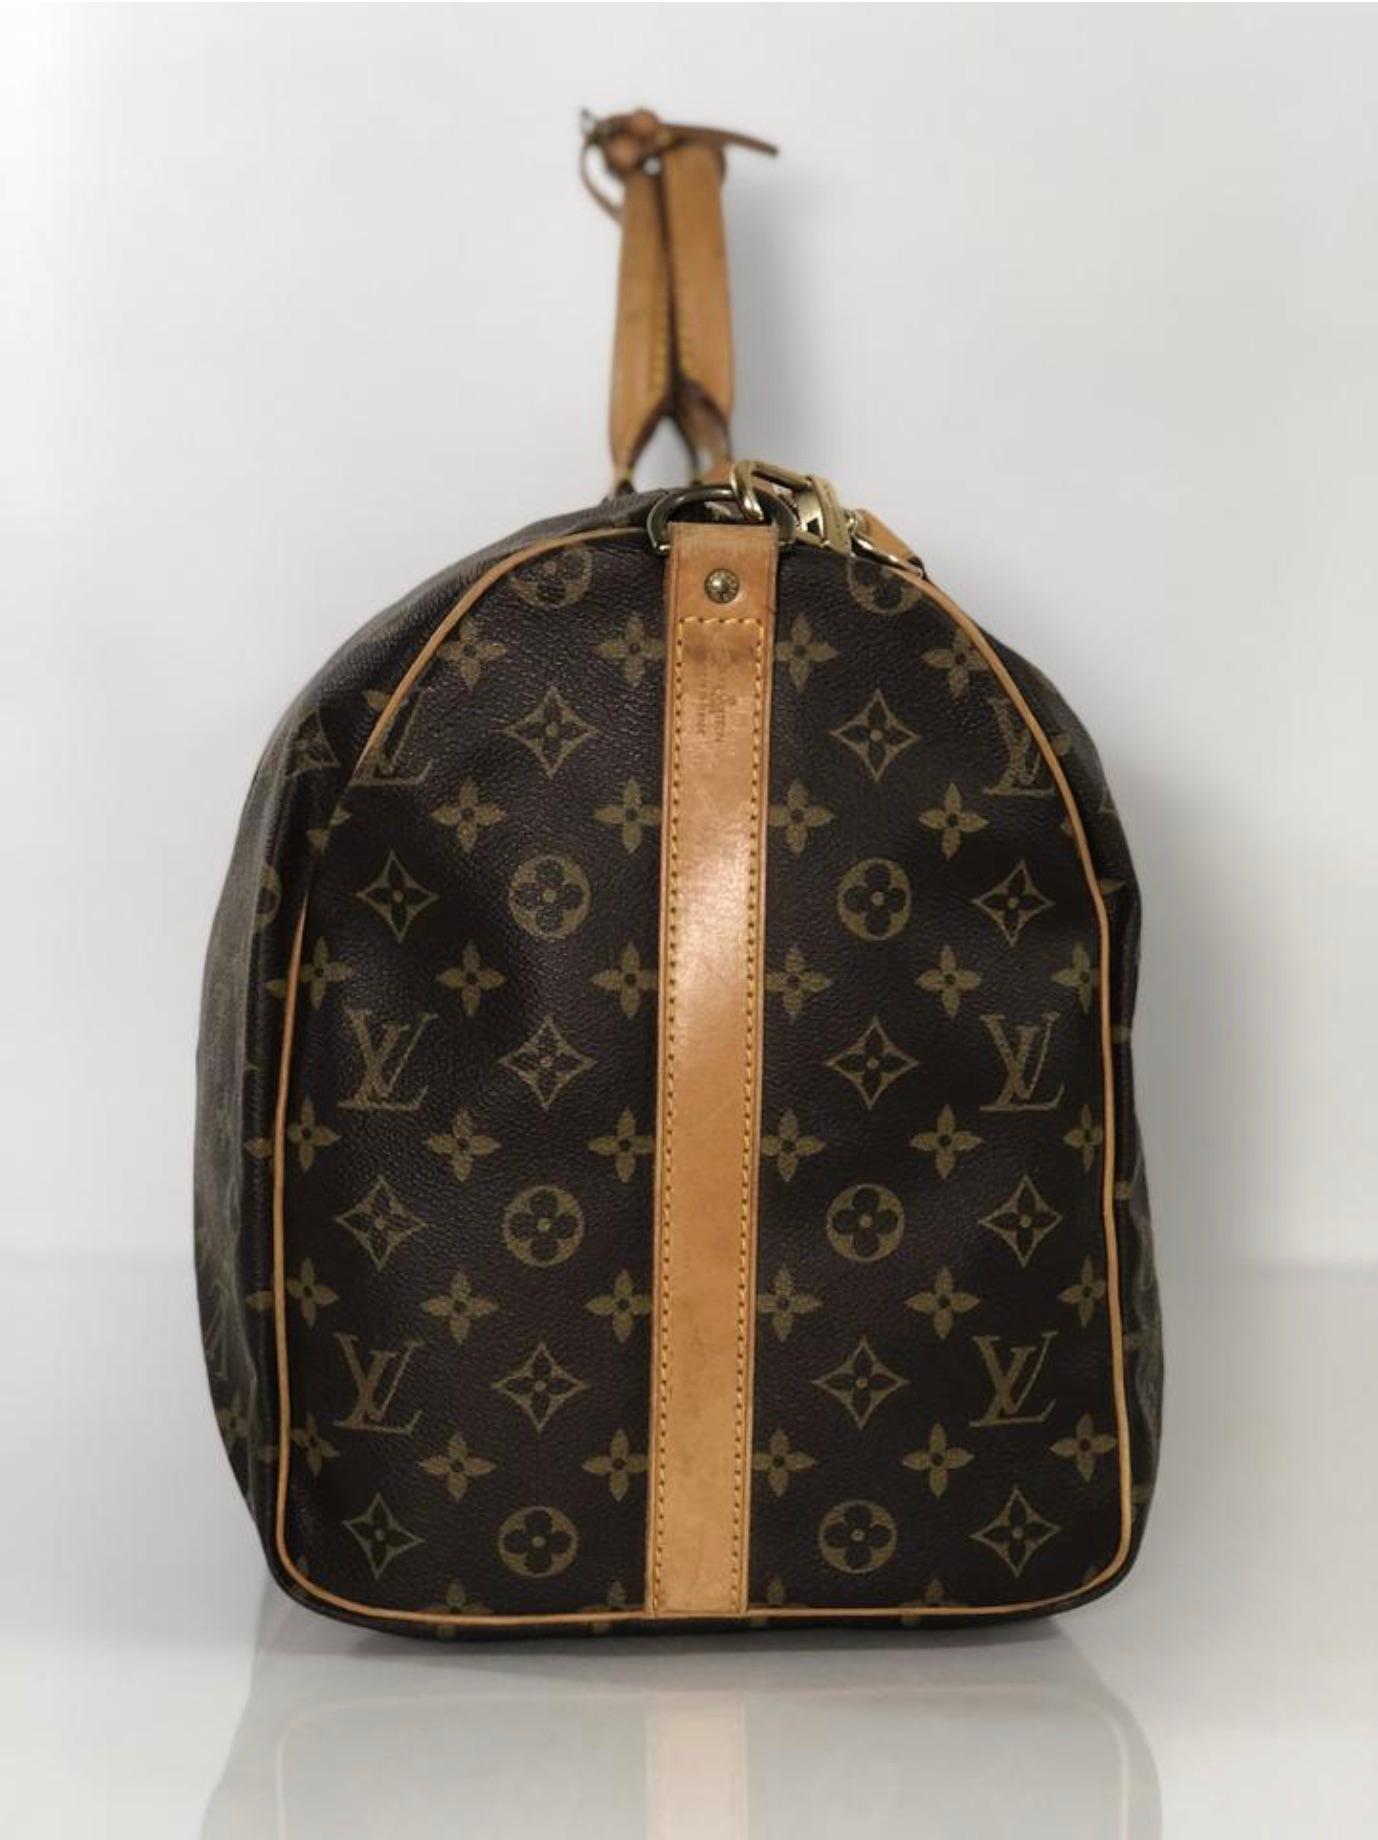 Louis Vuitton Monogram Keepall Bandoliere 50 Travel Handbag In Good Condition For Sale In Saint Charles, IL